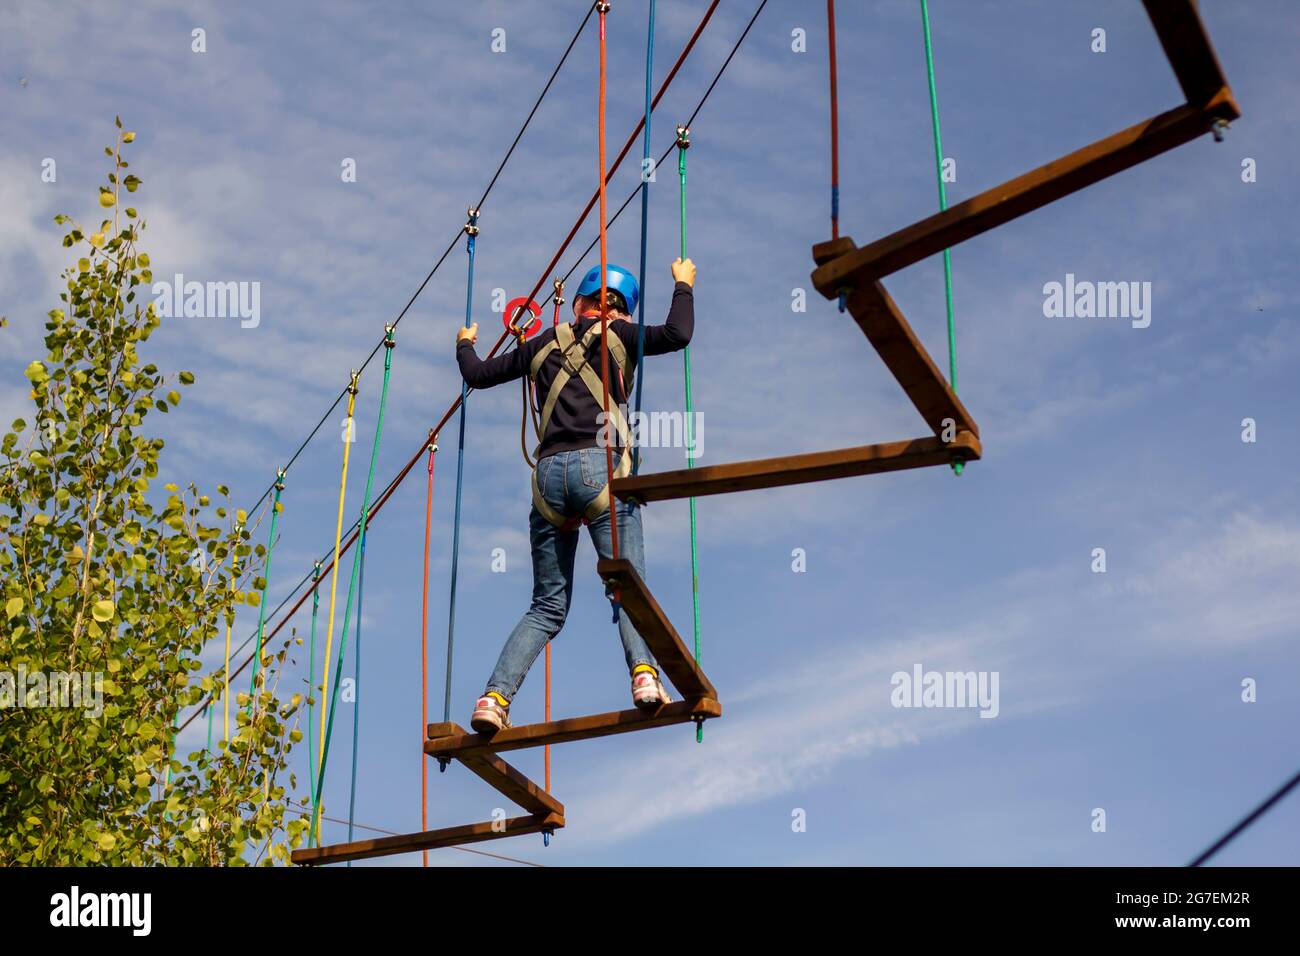 The girl is being trained in mountaineering at special children's courses. The concept of the development of sports for children and youth. Stock Photo